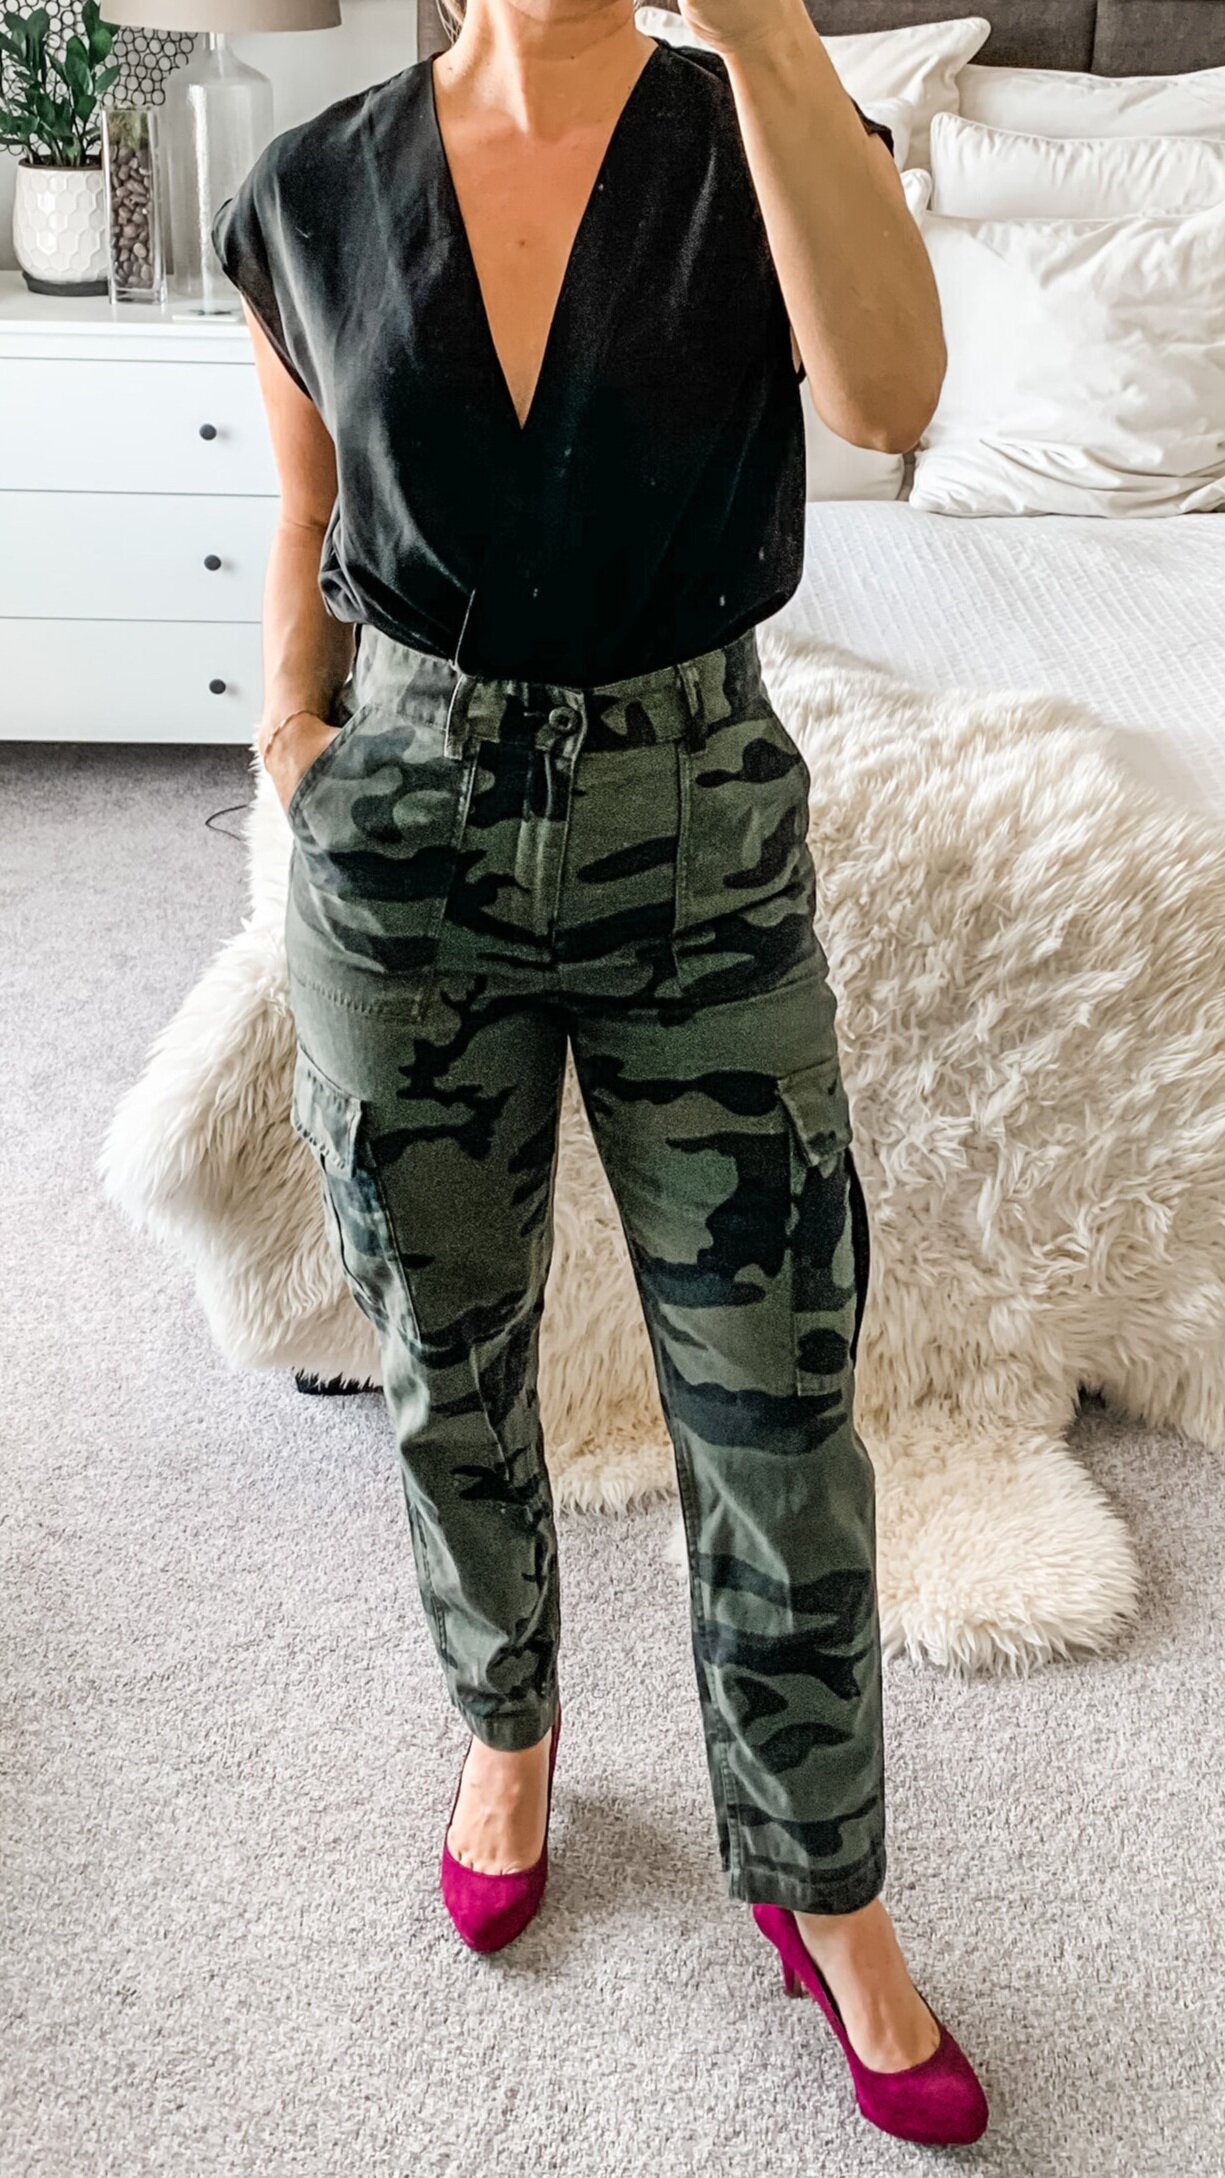 CAMO + POP OF COLOR ARE A MUST!